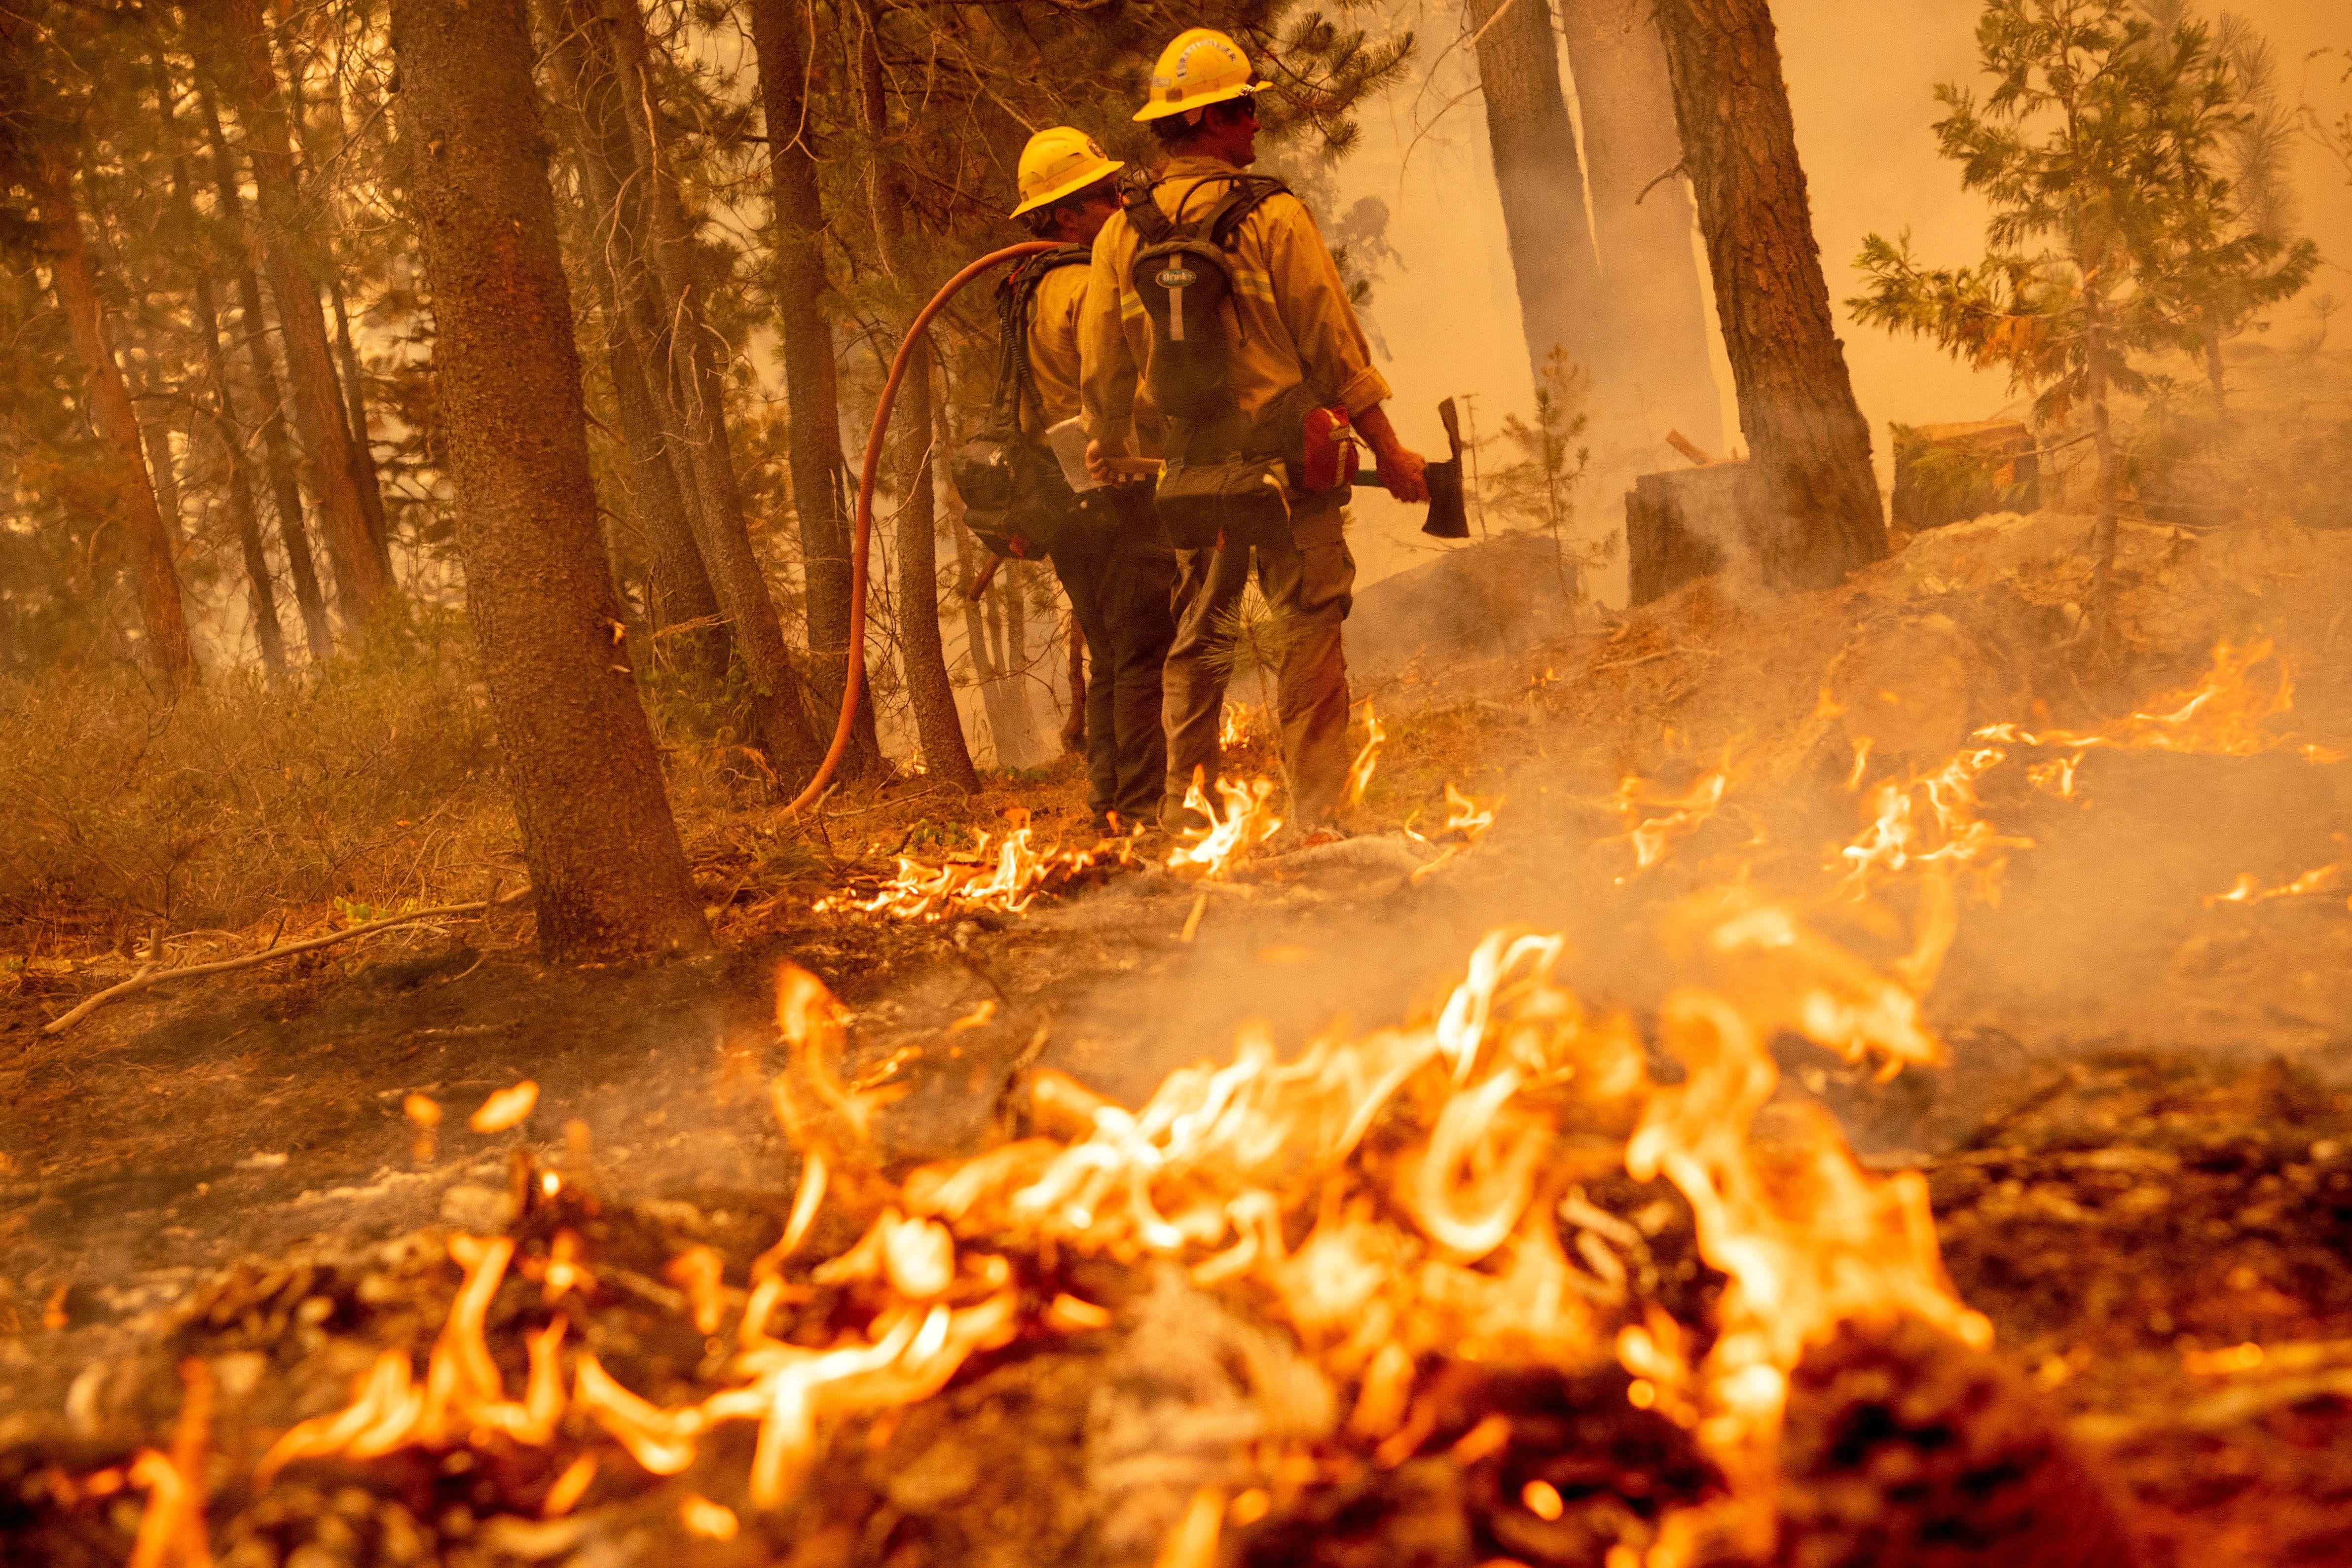 Firefighters work to keep flames from the Caldor fire from jumping highway 50 in Meyers, California on August 31, 2021.